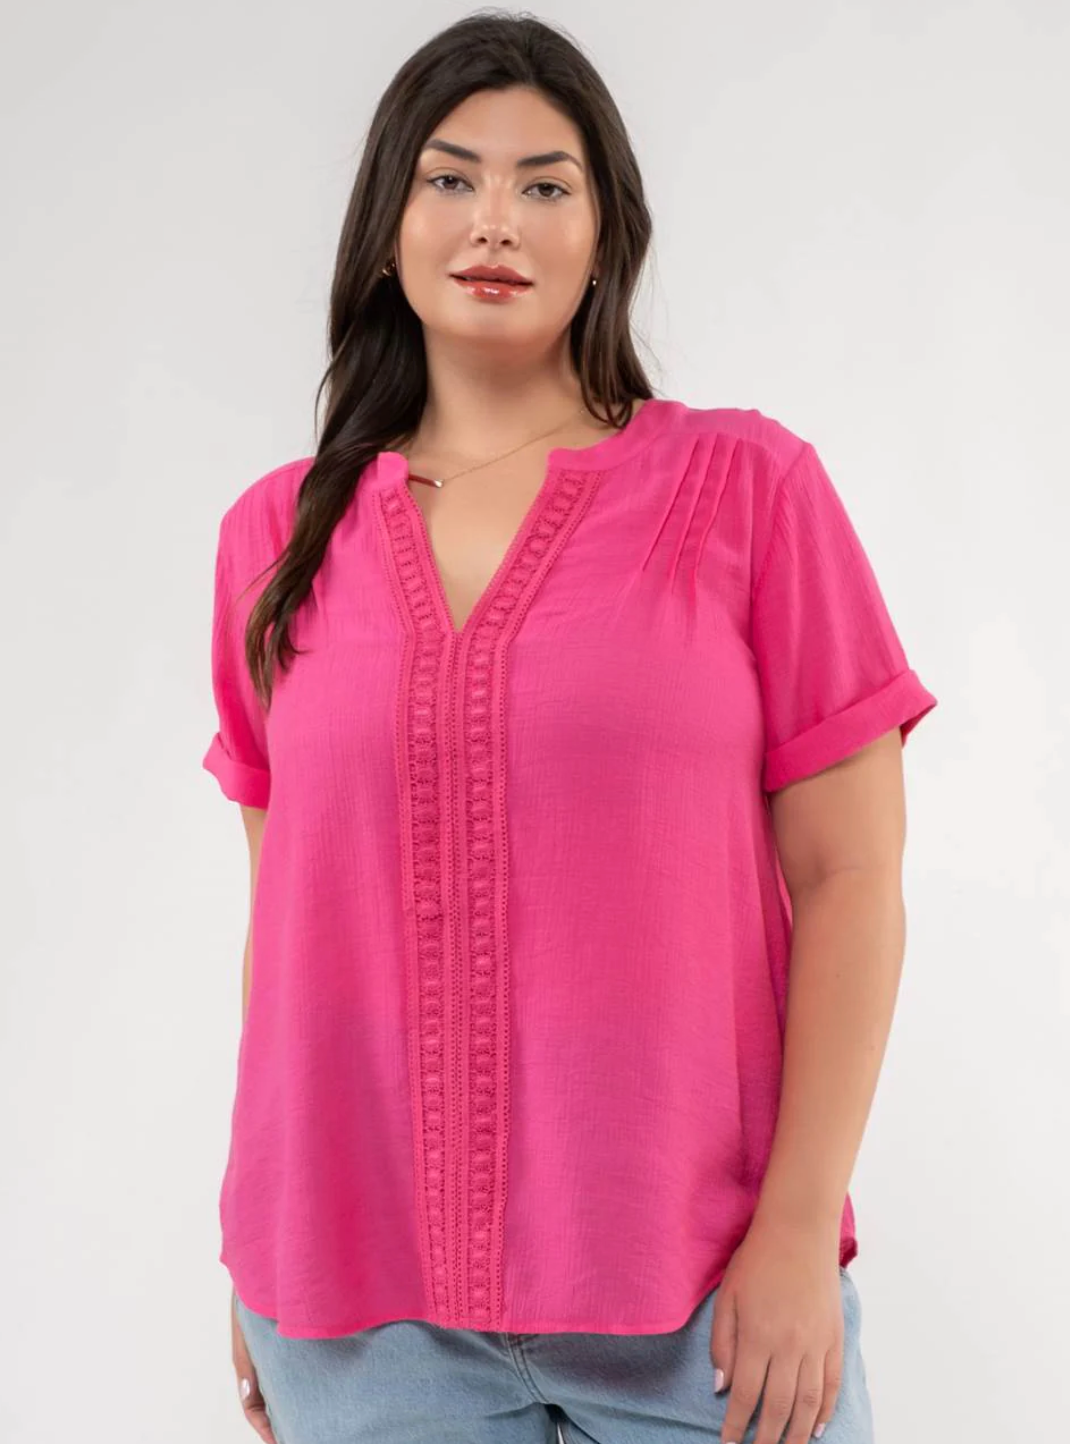 CURVY Floral Lace Woven Top in Fuchsia - The Street Boutique 